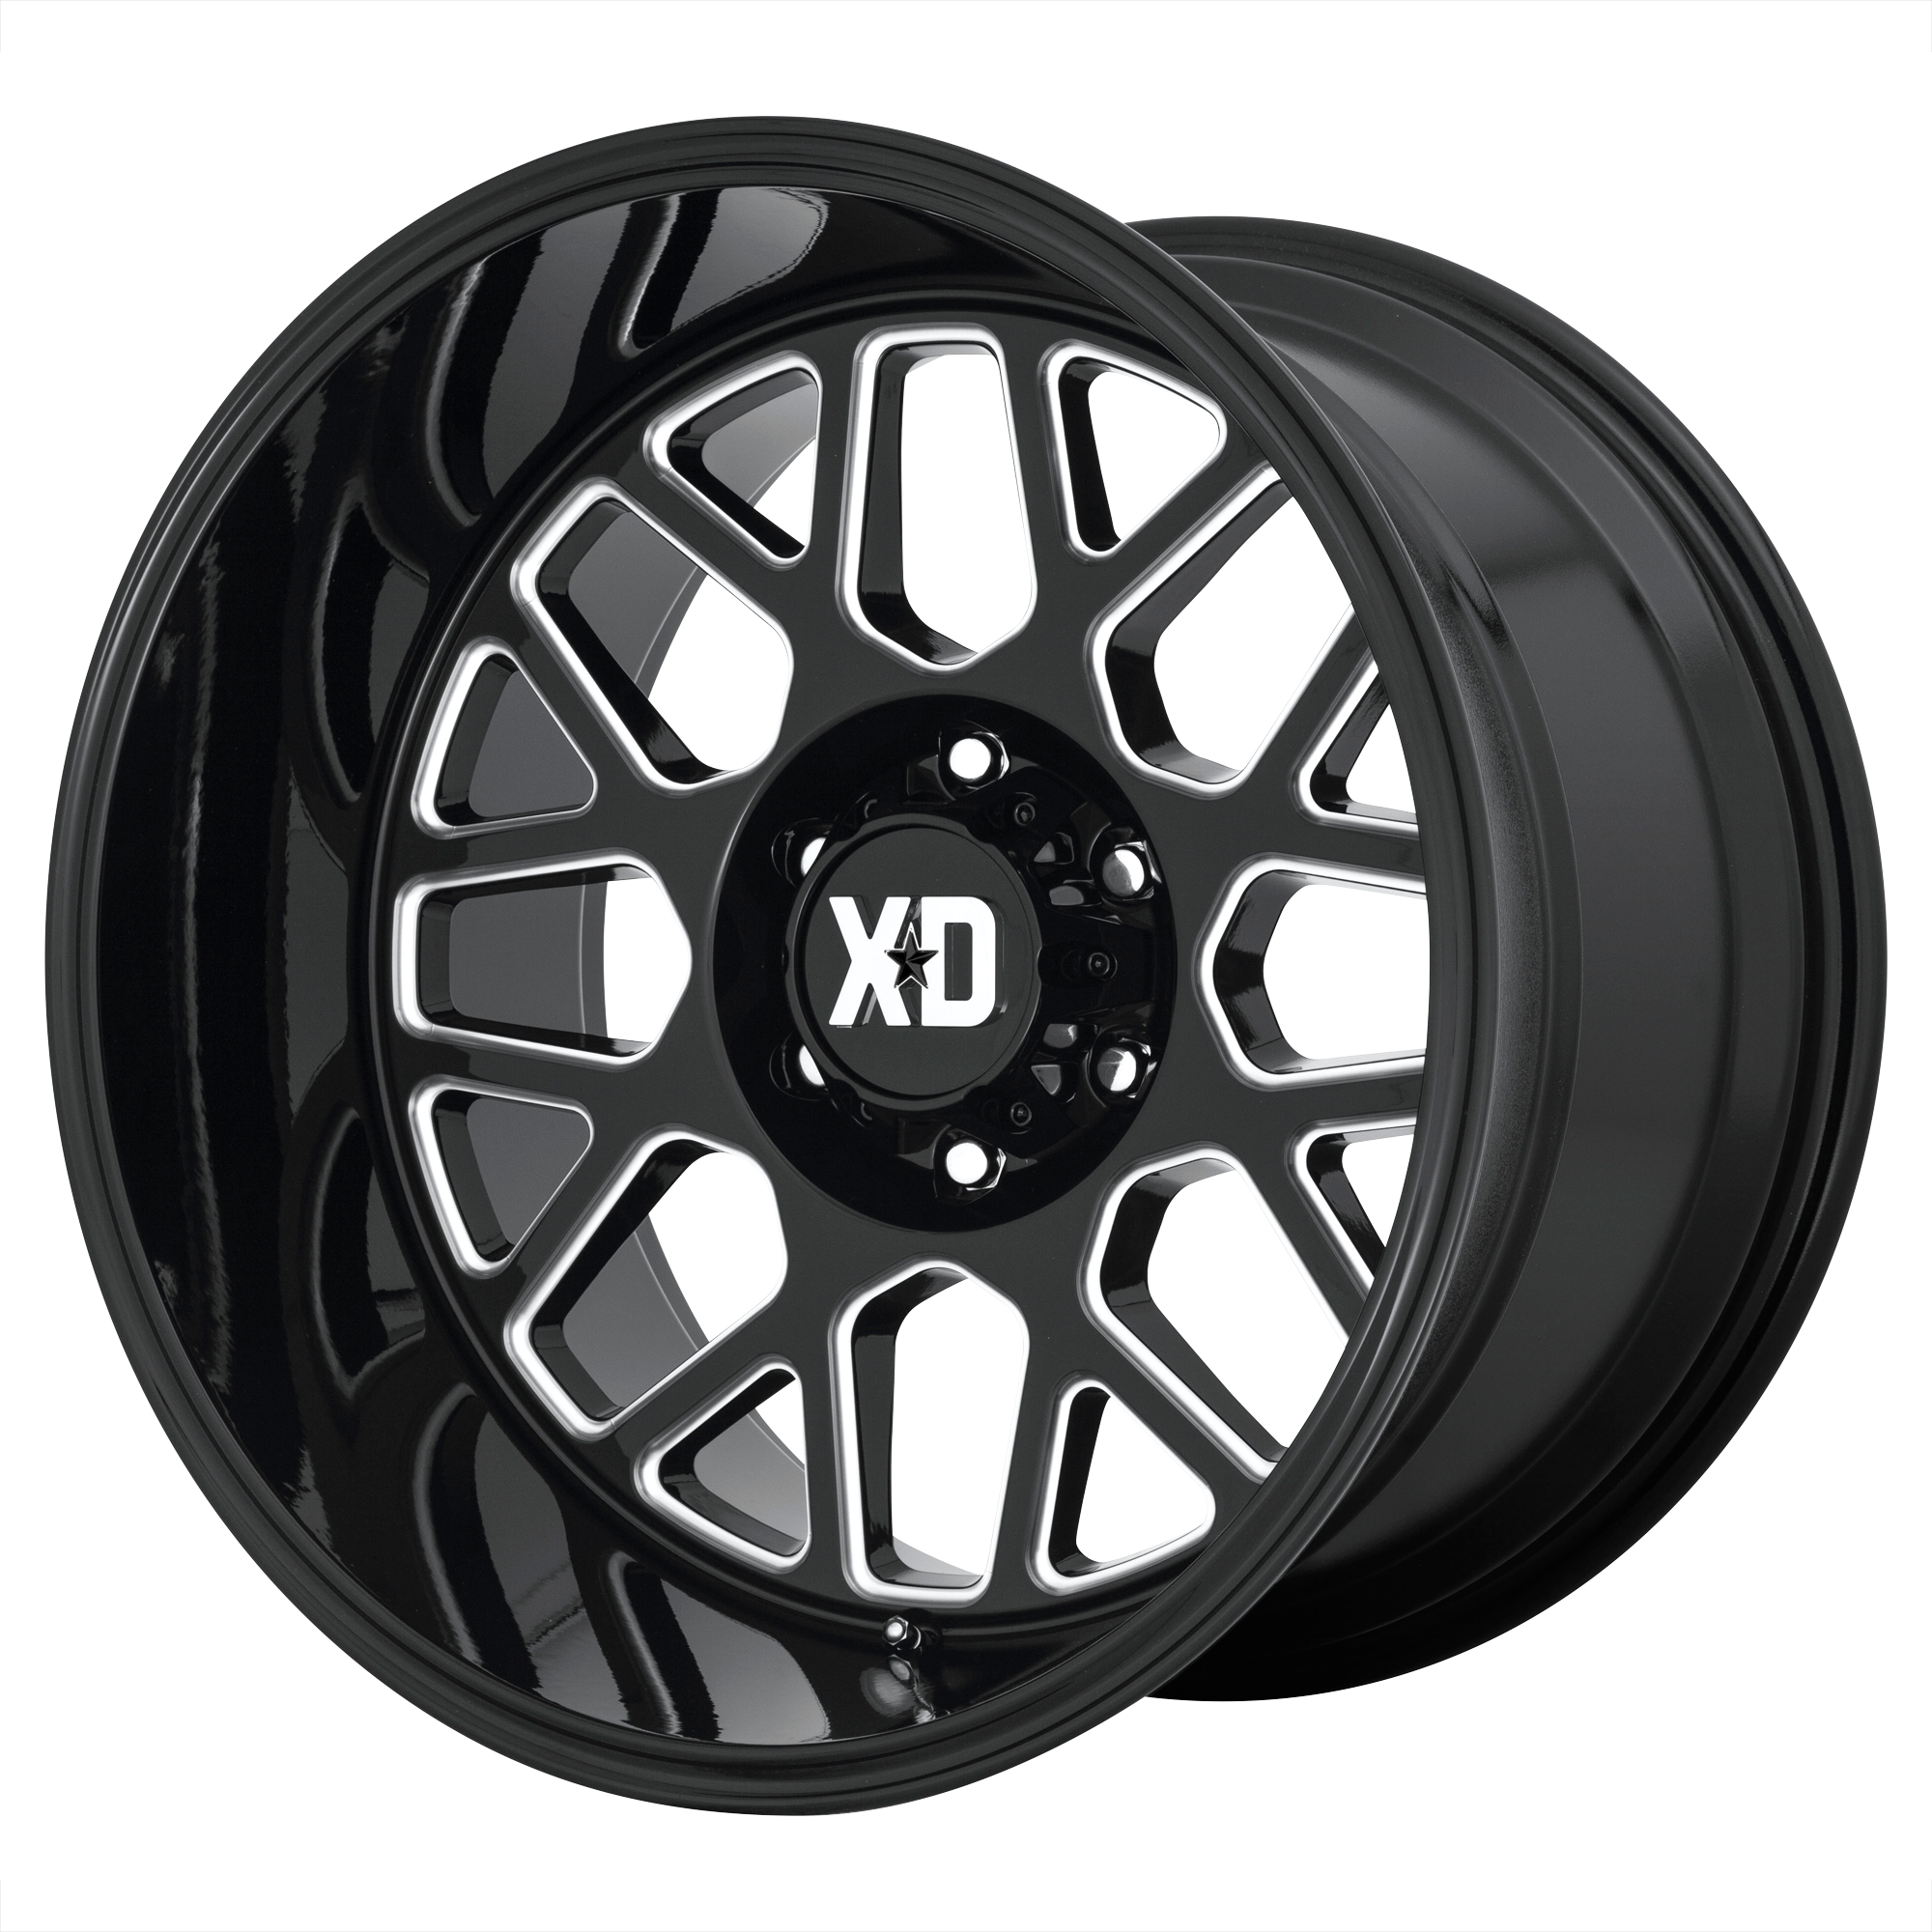 GRENADE 2 24x12 8x170.00 GLOSS BLACK MILLED (-44 mm) - Tires and Engine Performance